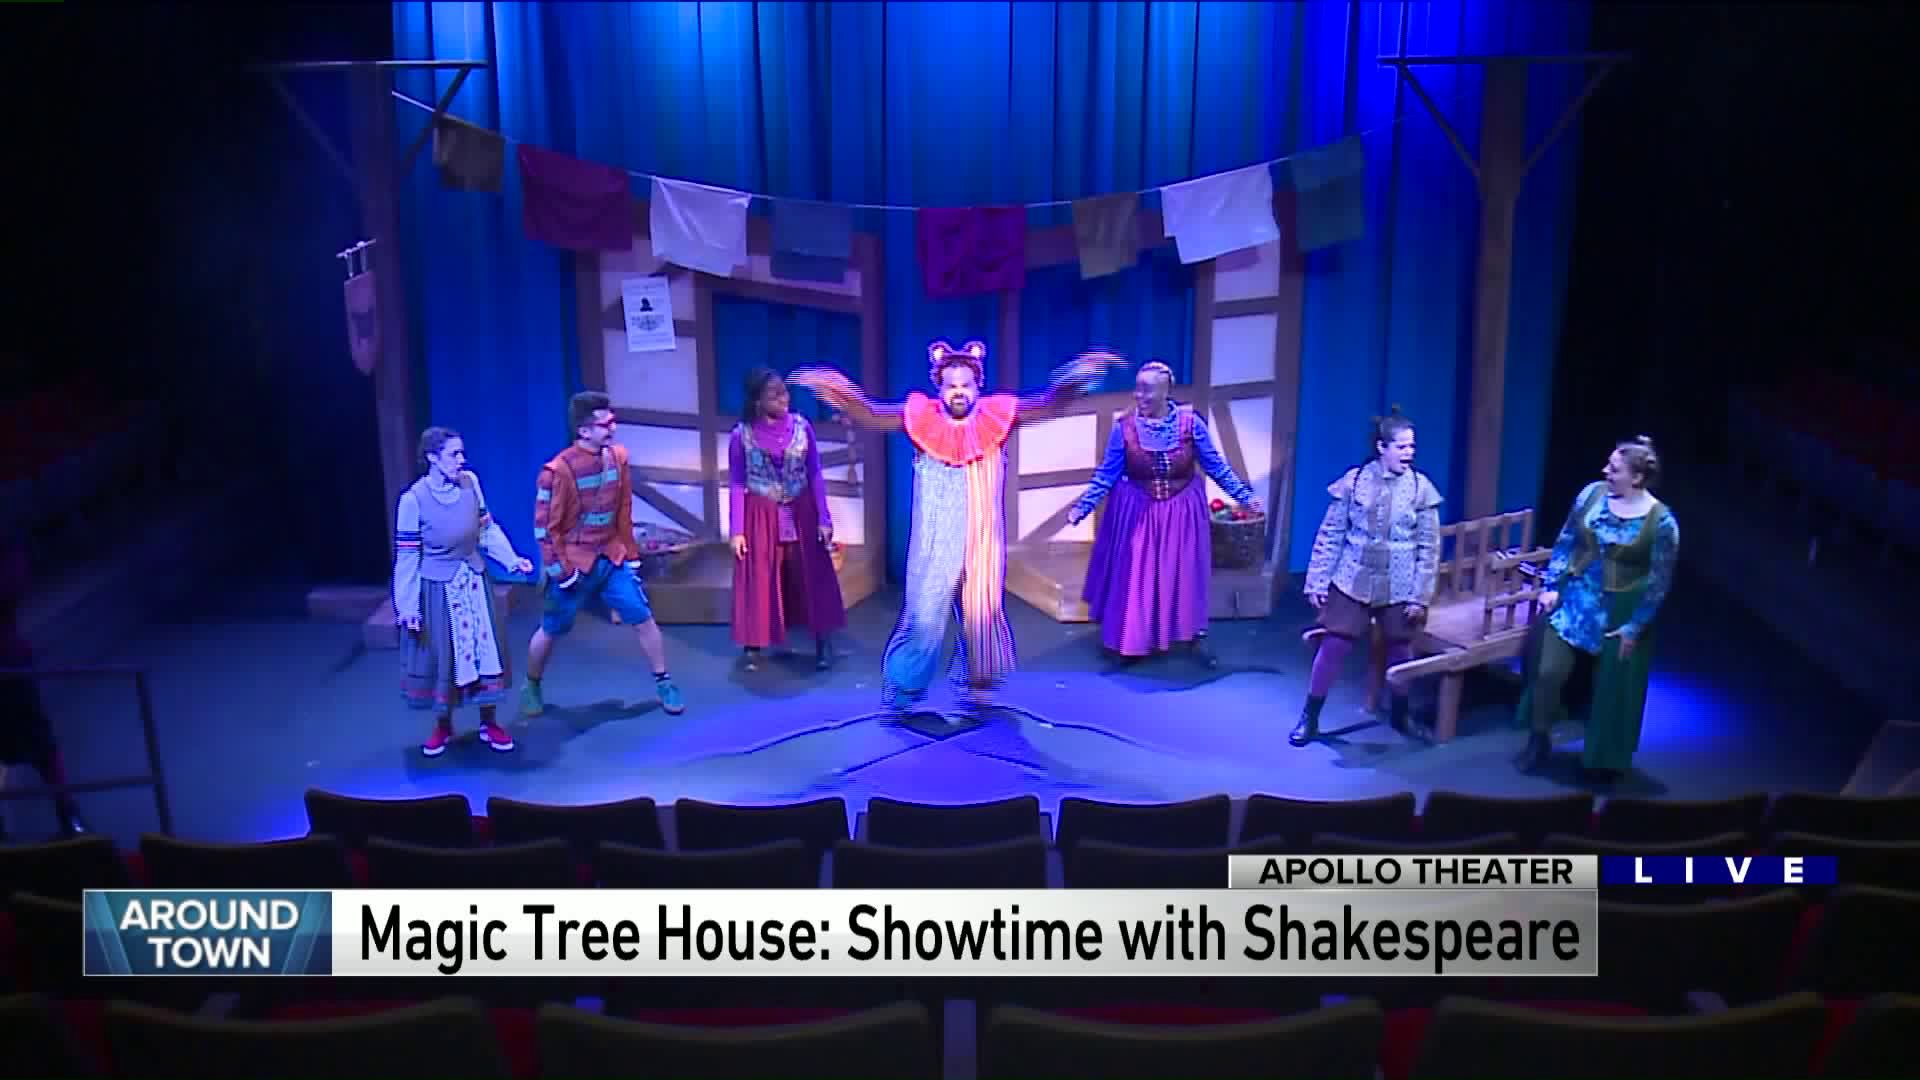 Around Town checks out Magic Tree House: Showtime for Shakespeare